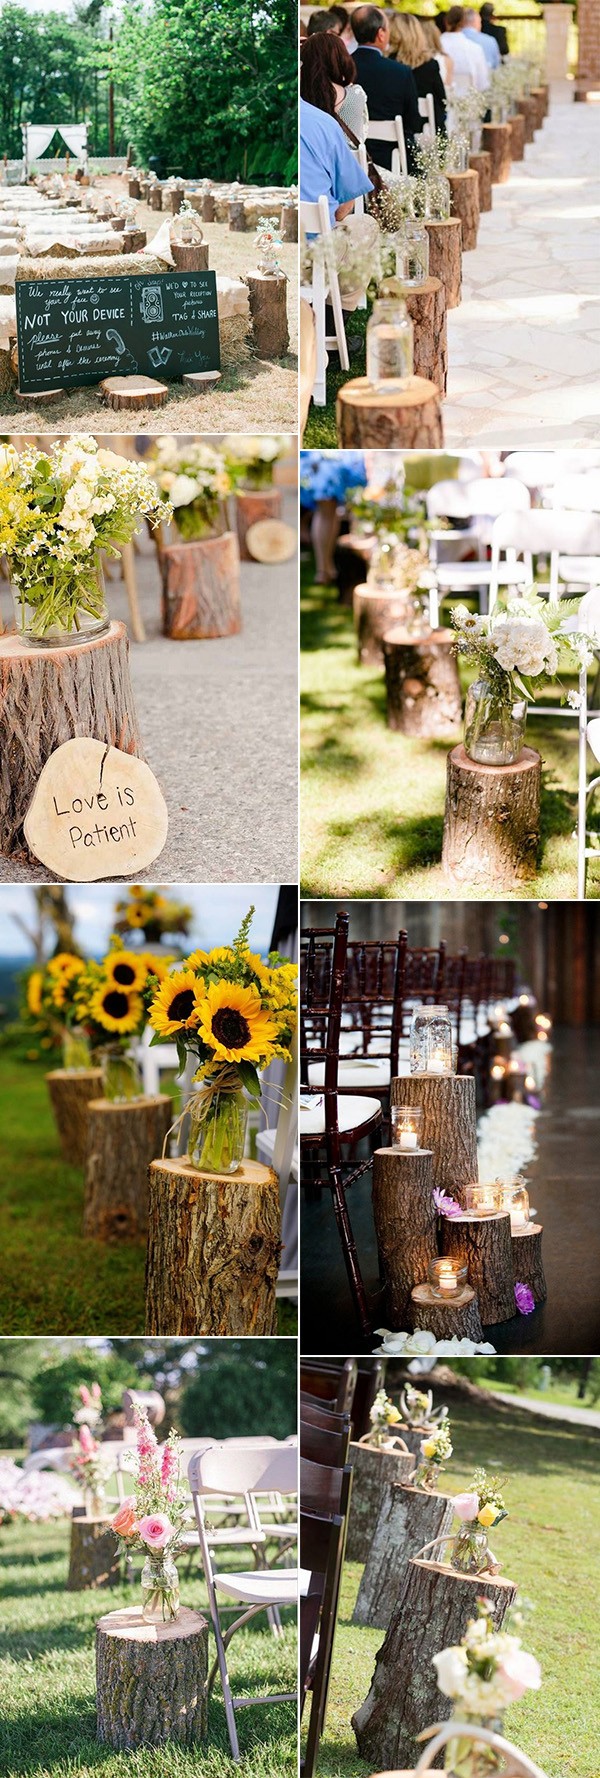 country rustic wedding aisle decoration ideas with tree stumps